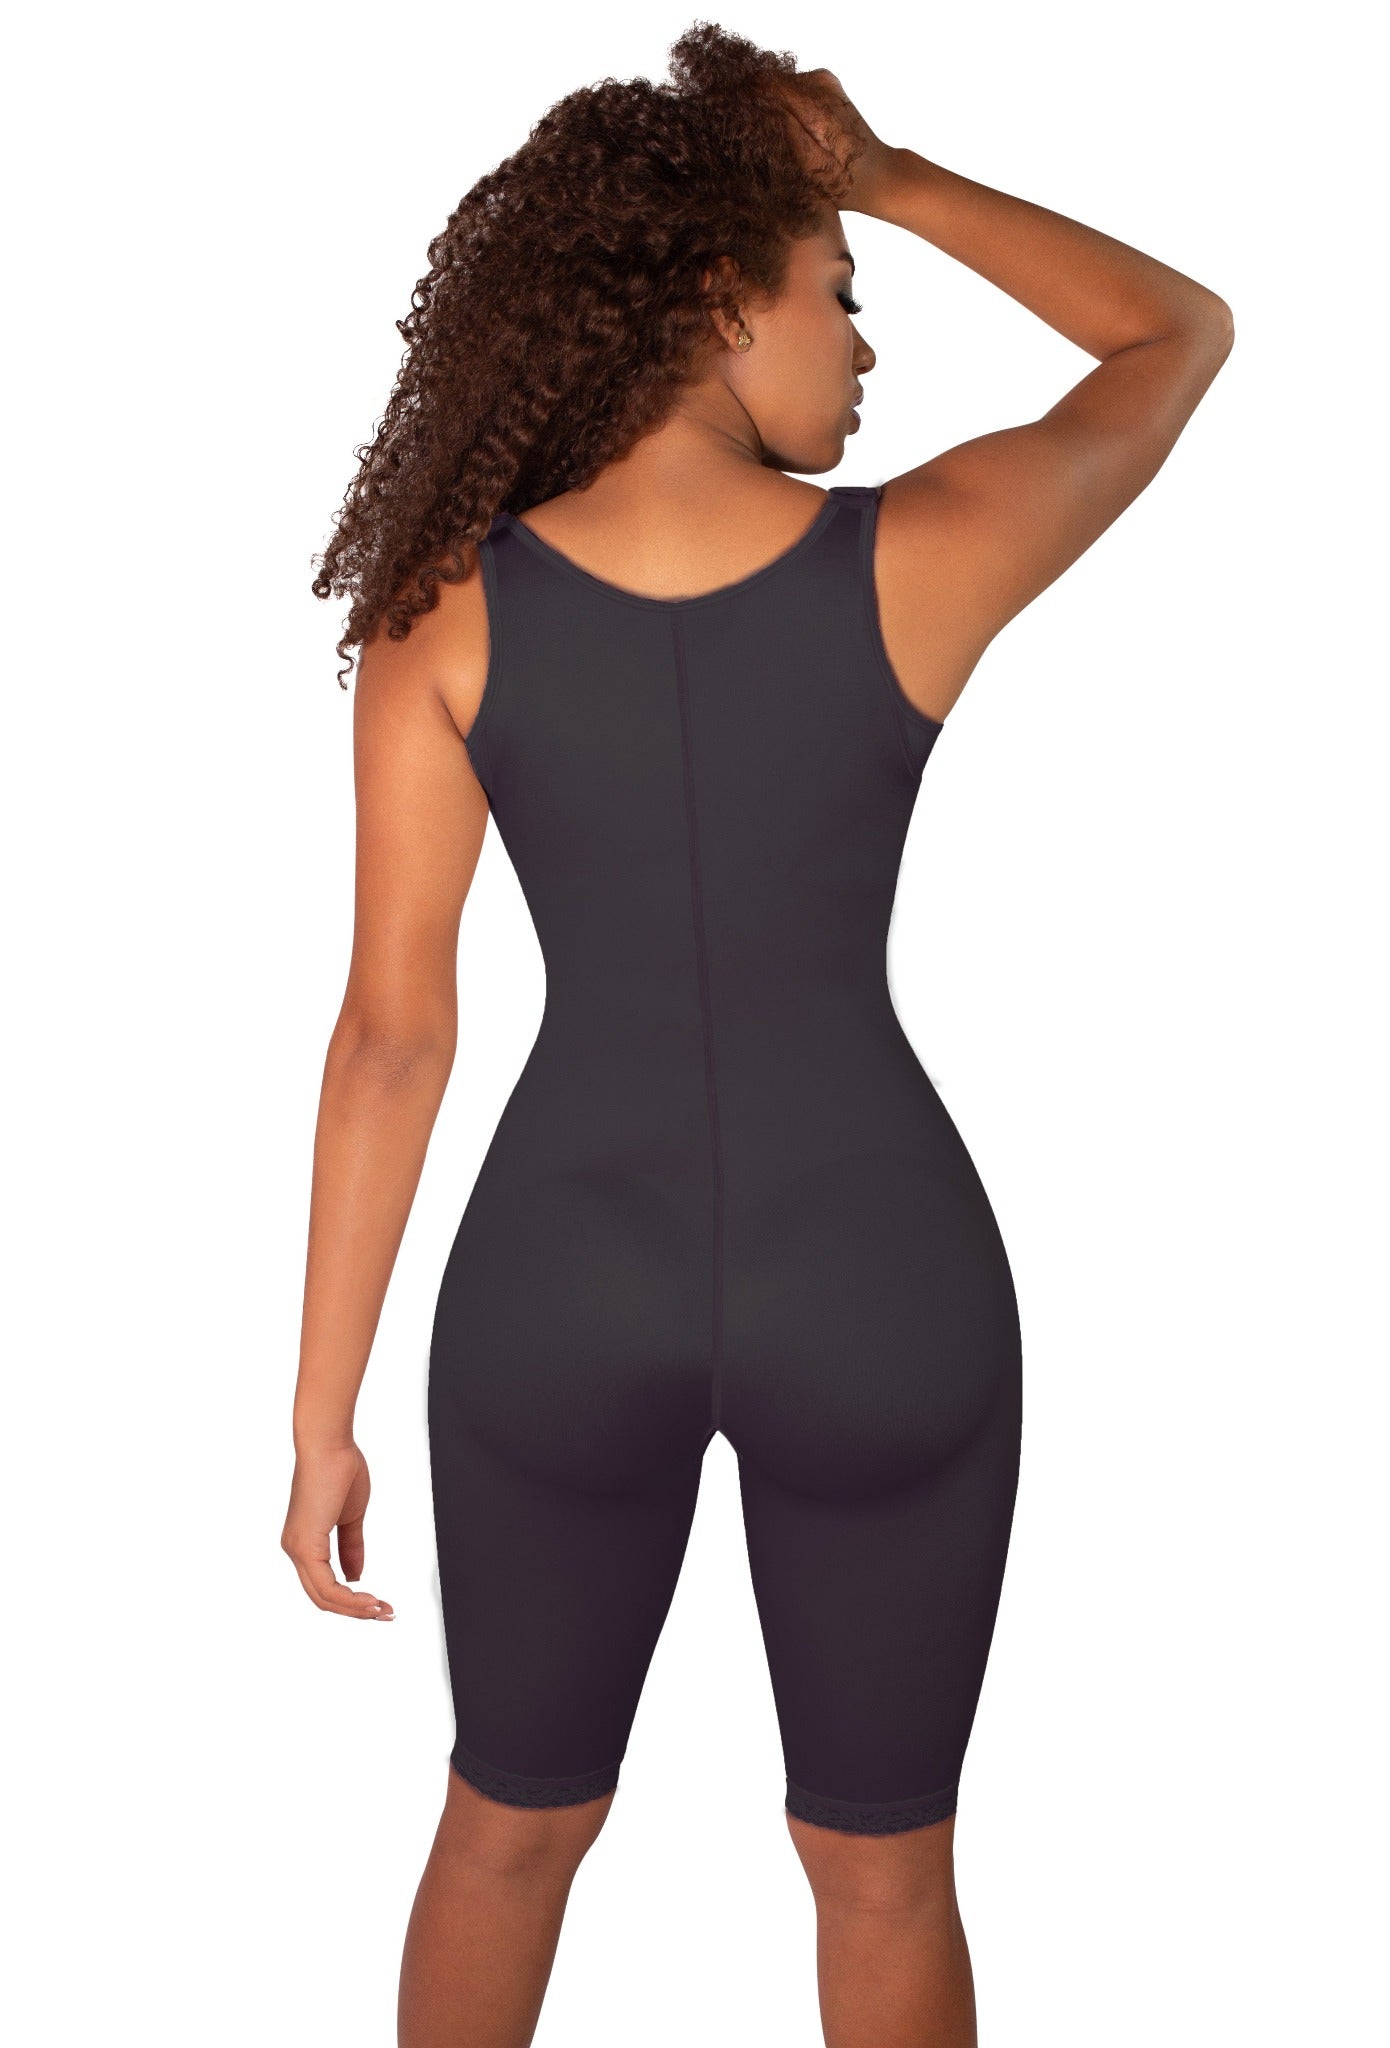 Full Body Control Suit w/ Front Closure & Back Support